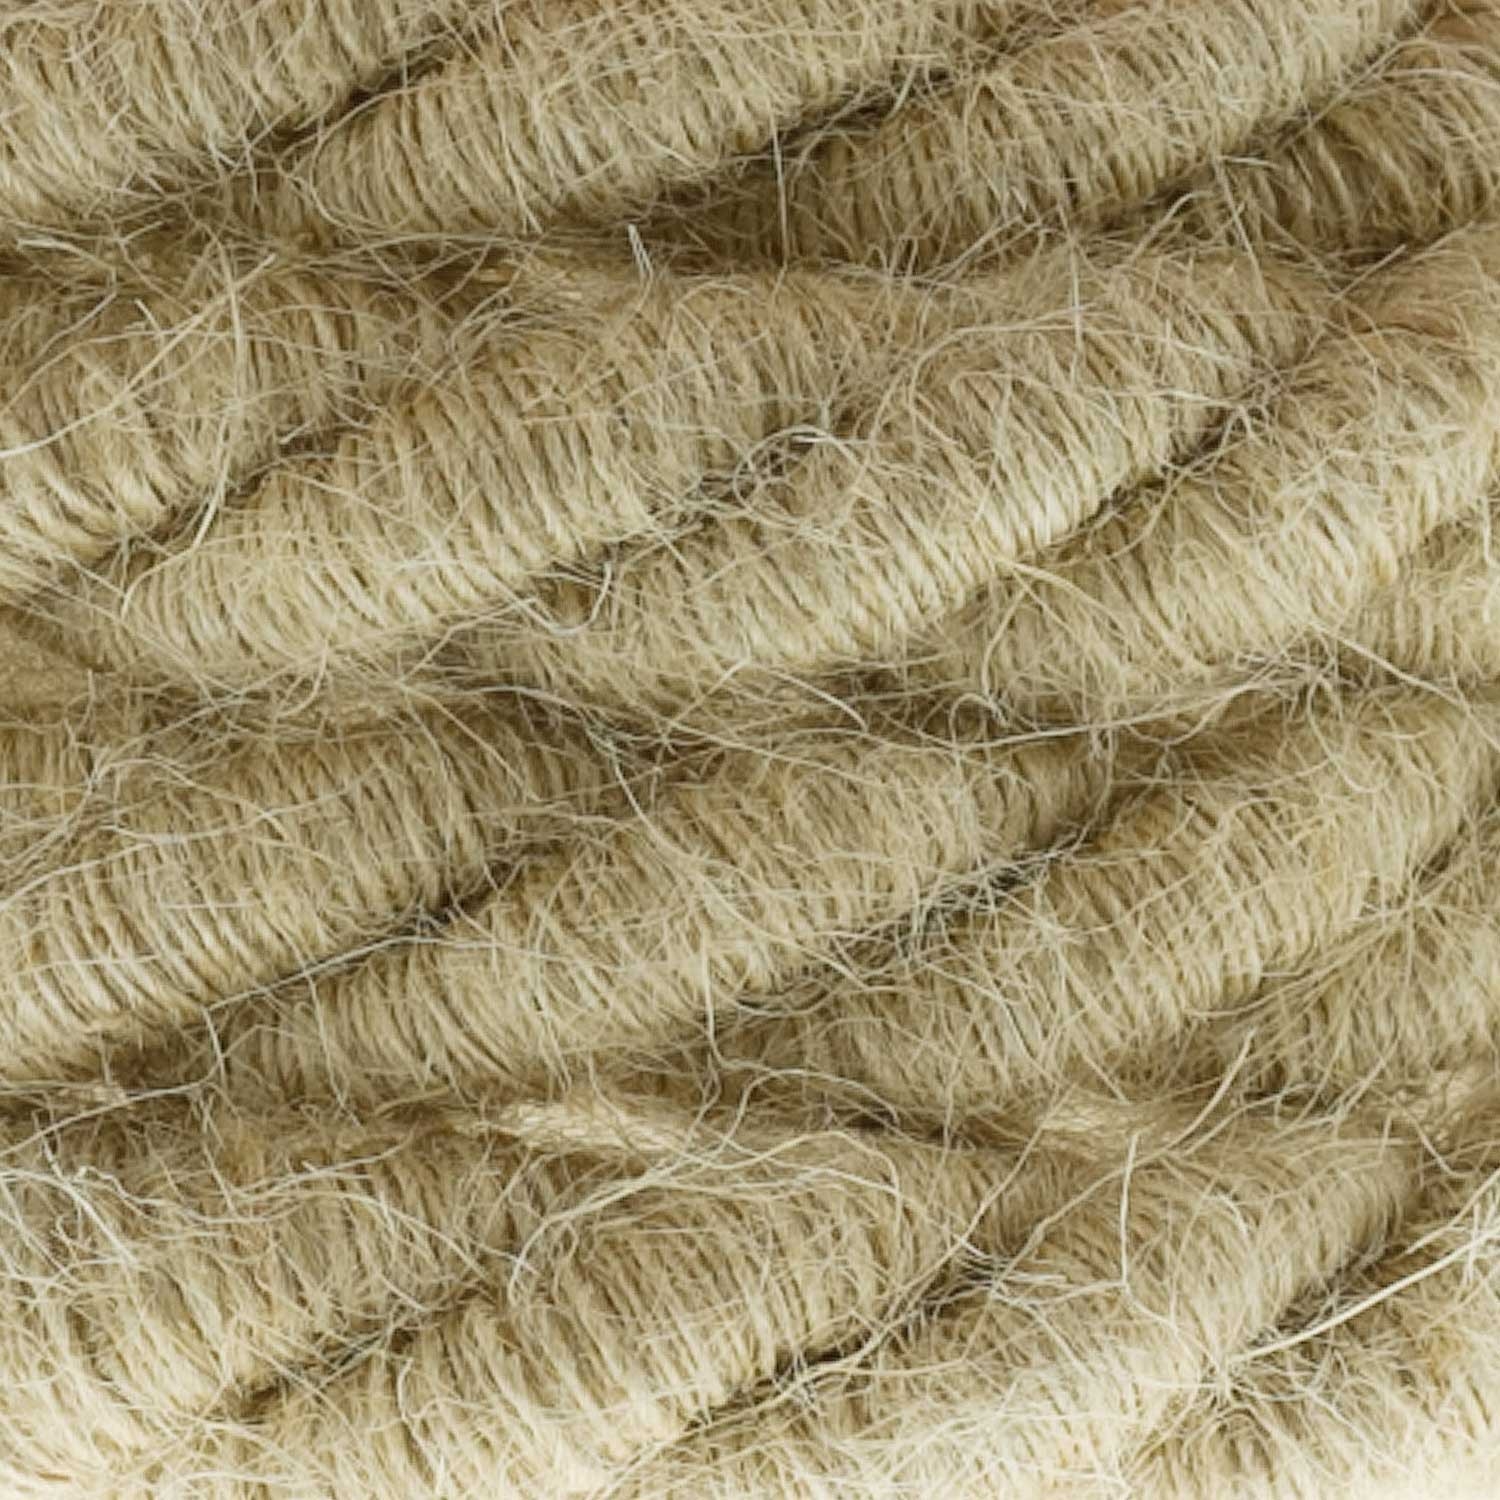 XL Rope electrical wire 18/3 AWG wire inside. Rough Jute Fabric covering. 16mm.